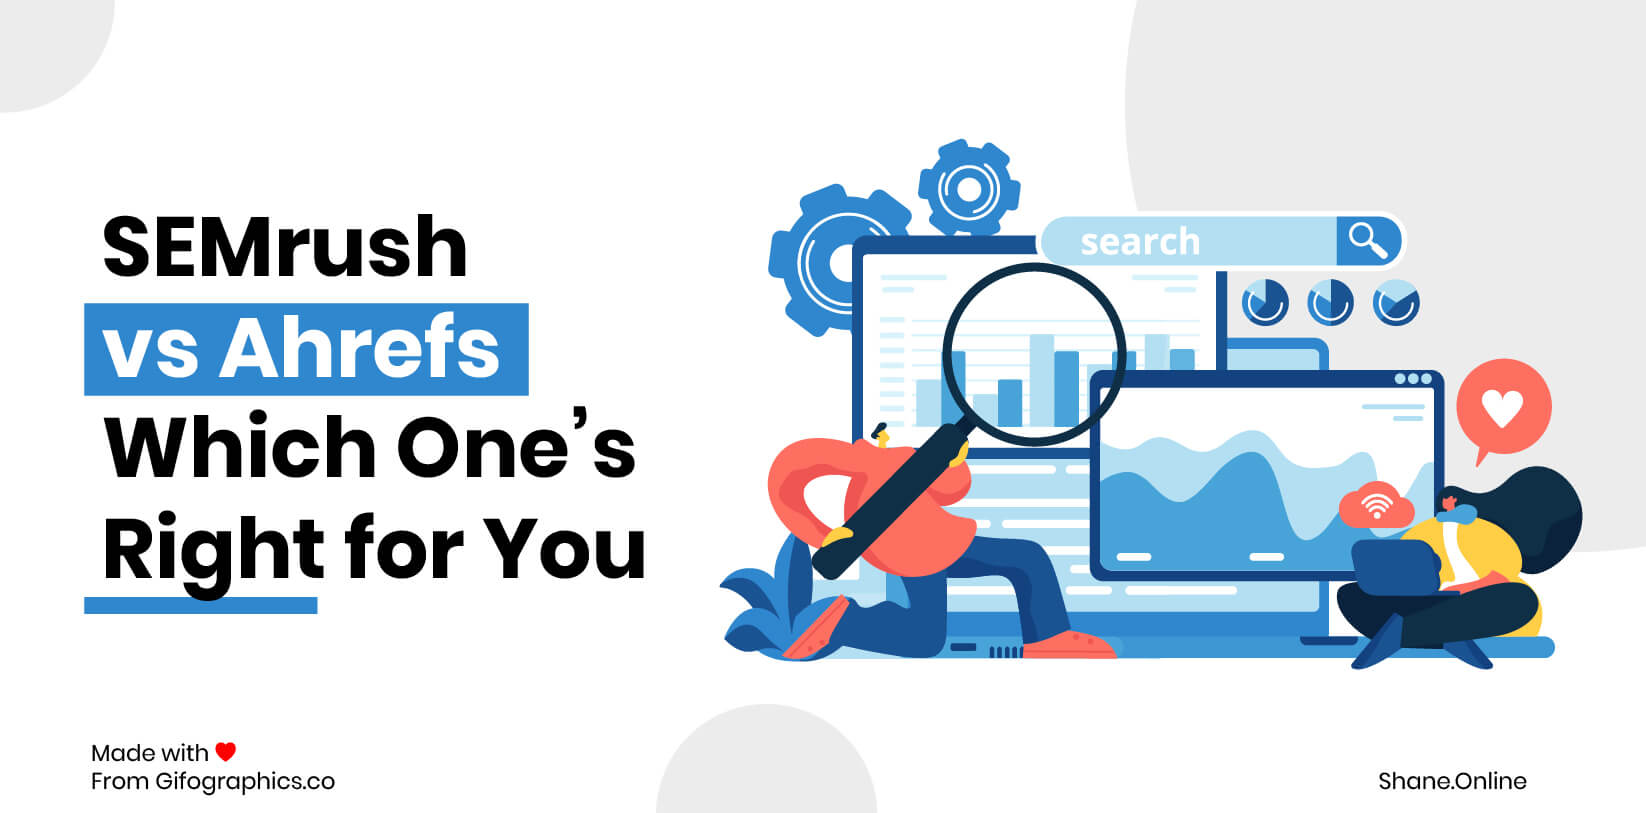 SEMrush vs Ahrefs Which One’s Right for You